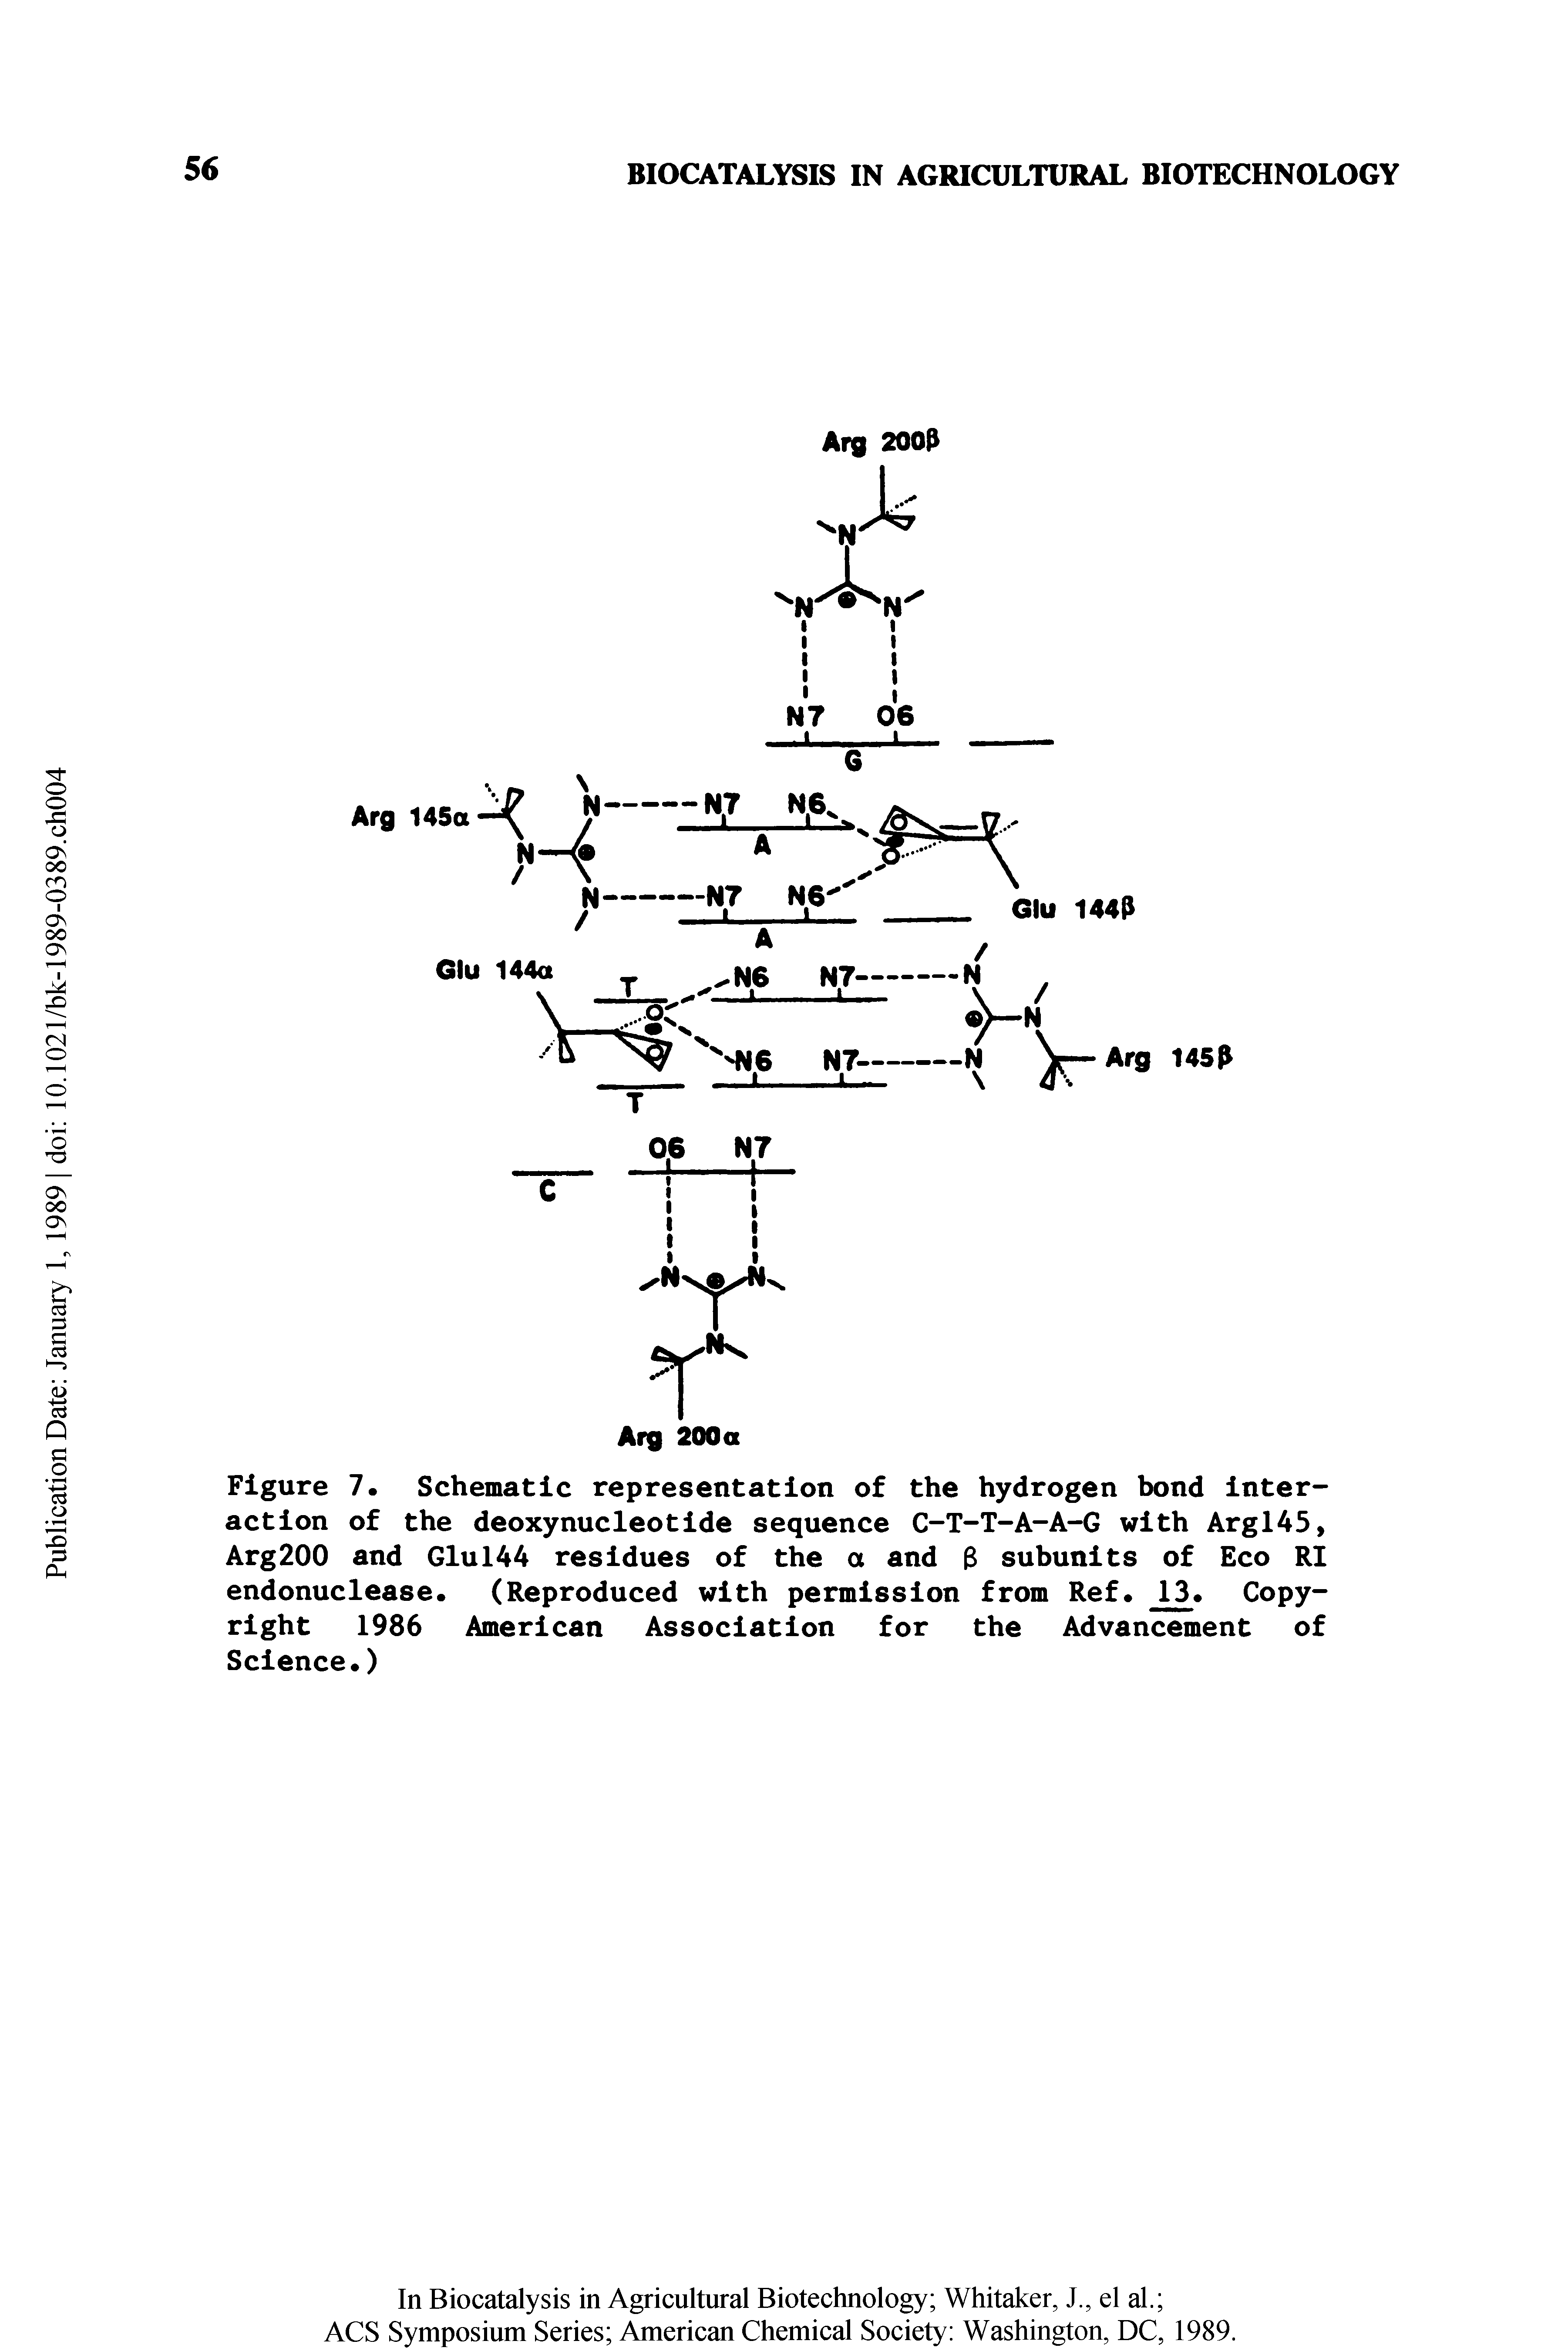 Figure 7. Schematic representation of the hydrogen bond interaction of the deoxynucleotide sequence C-T-T-A-A-G with Argl45, Arg200 and Glul44 residues of the a and 3 subunits of Eco RI endonuclease. (Reproduced with permission from Ref. 13. Copyright 1986 American Association for the Advancement of Science.)...